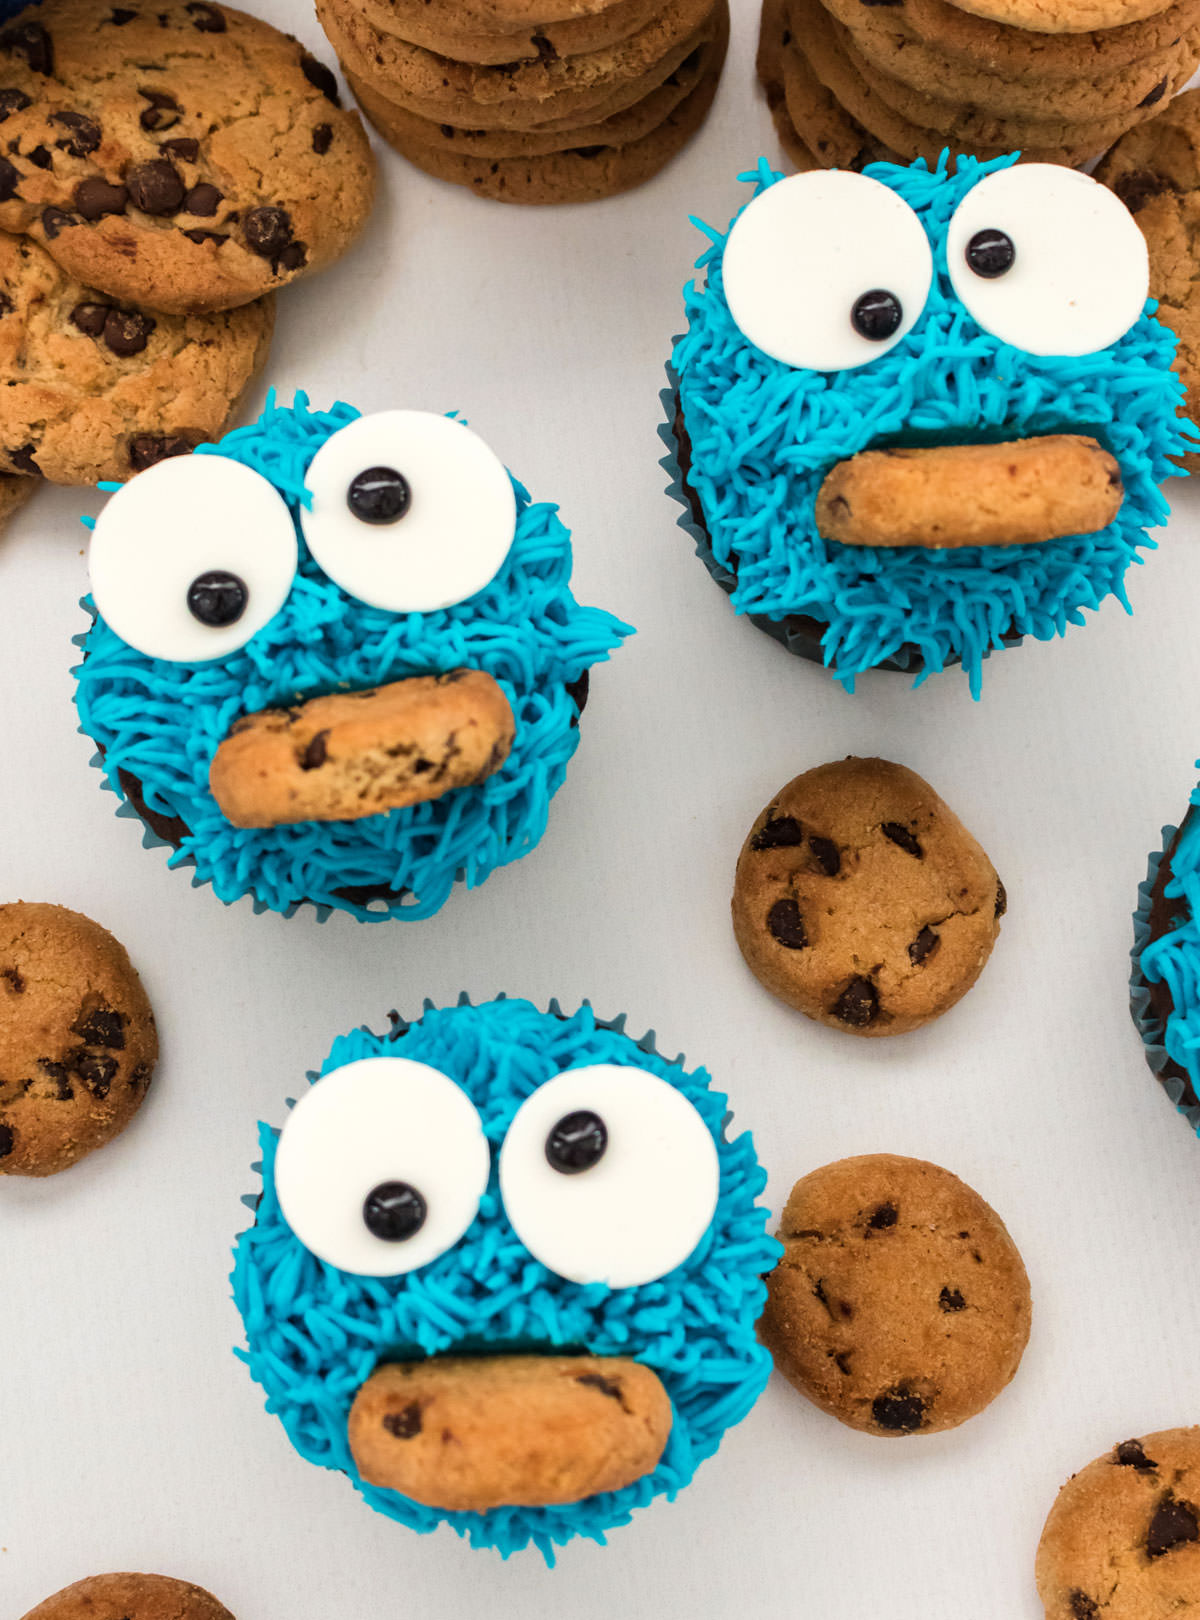 Three Cookie Monster Cupcakes sitting on a white table surrounded by Chocolate Cookies.